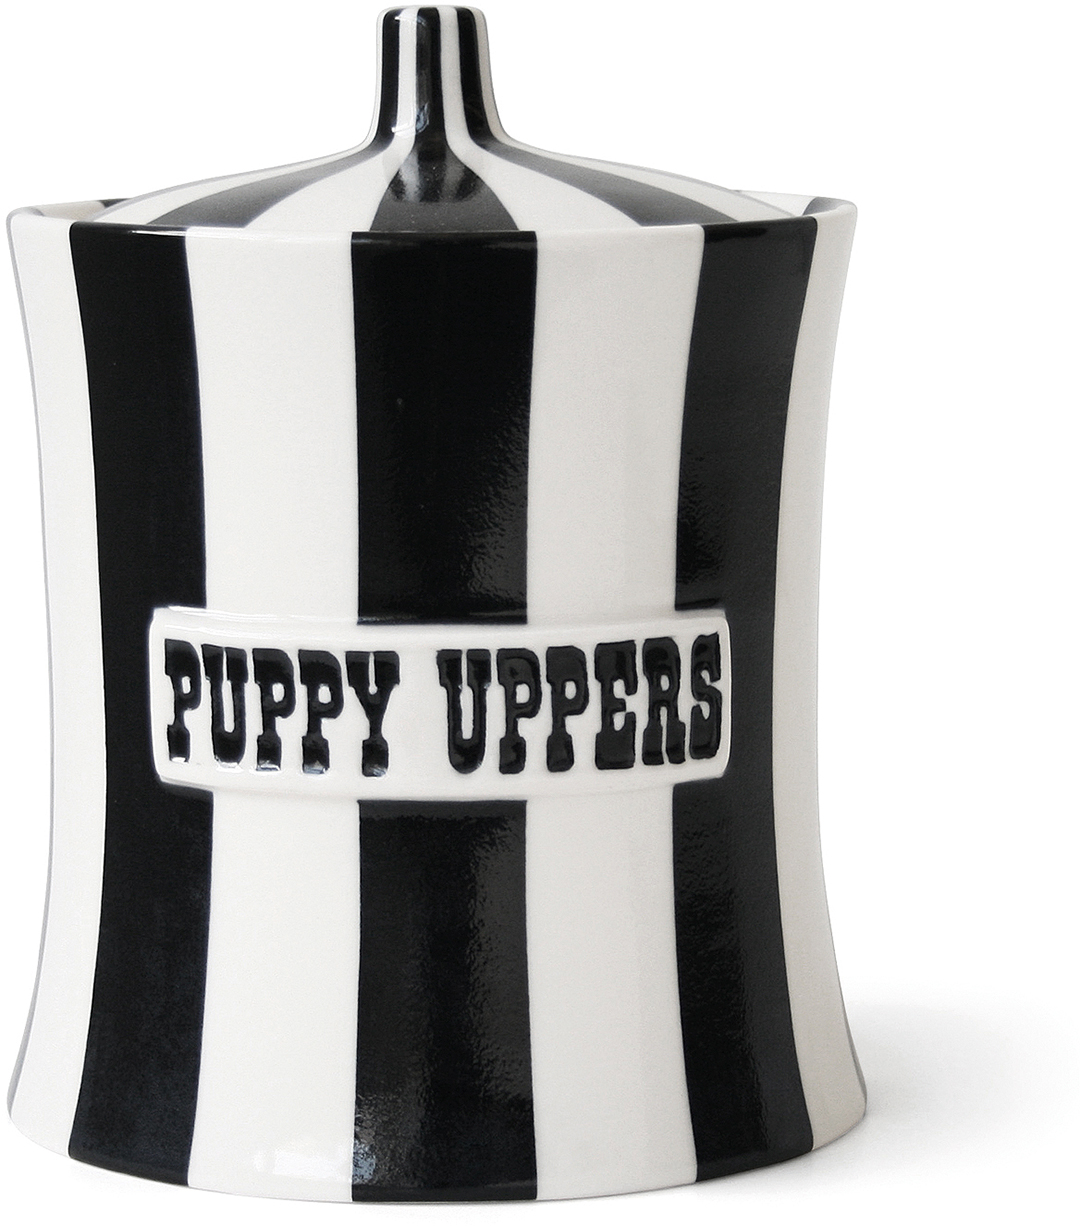 Circus-inspired black and white stripe canister